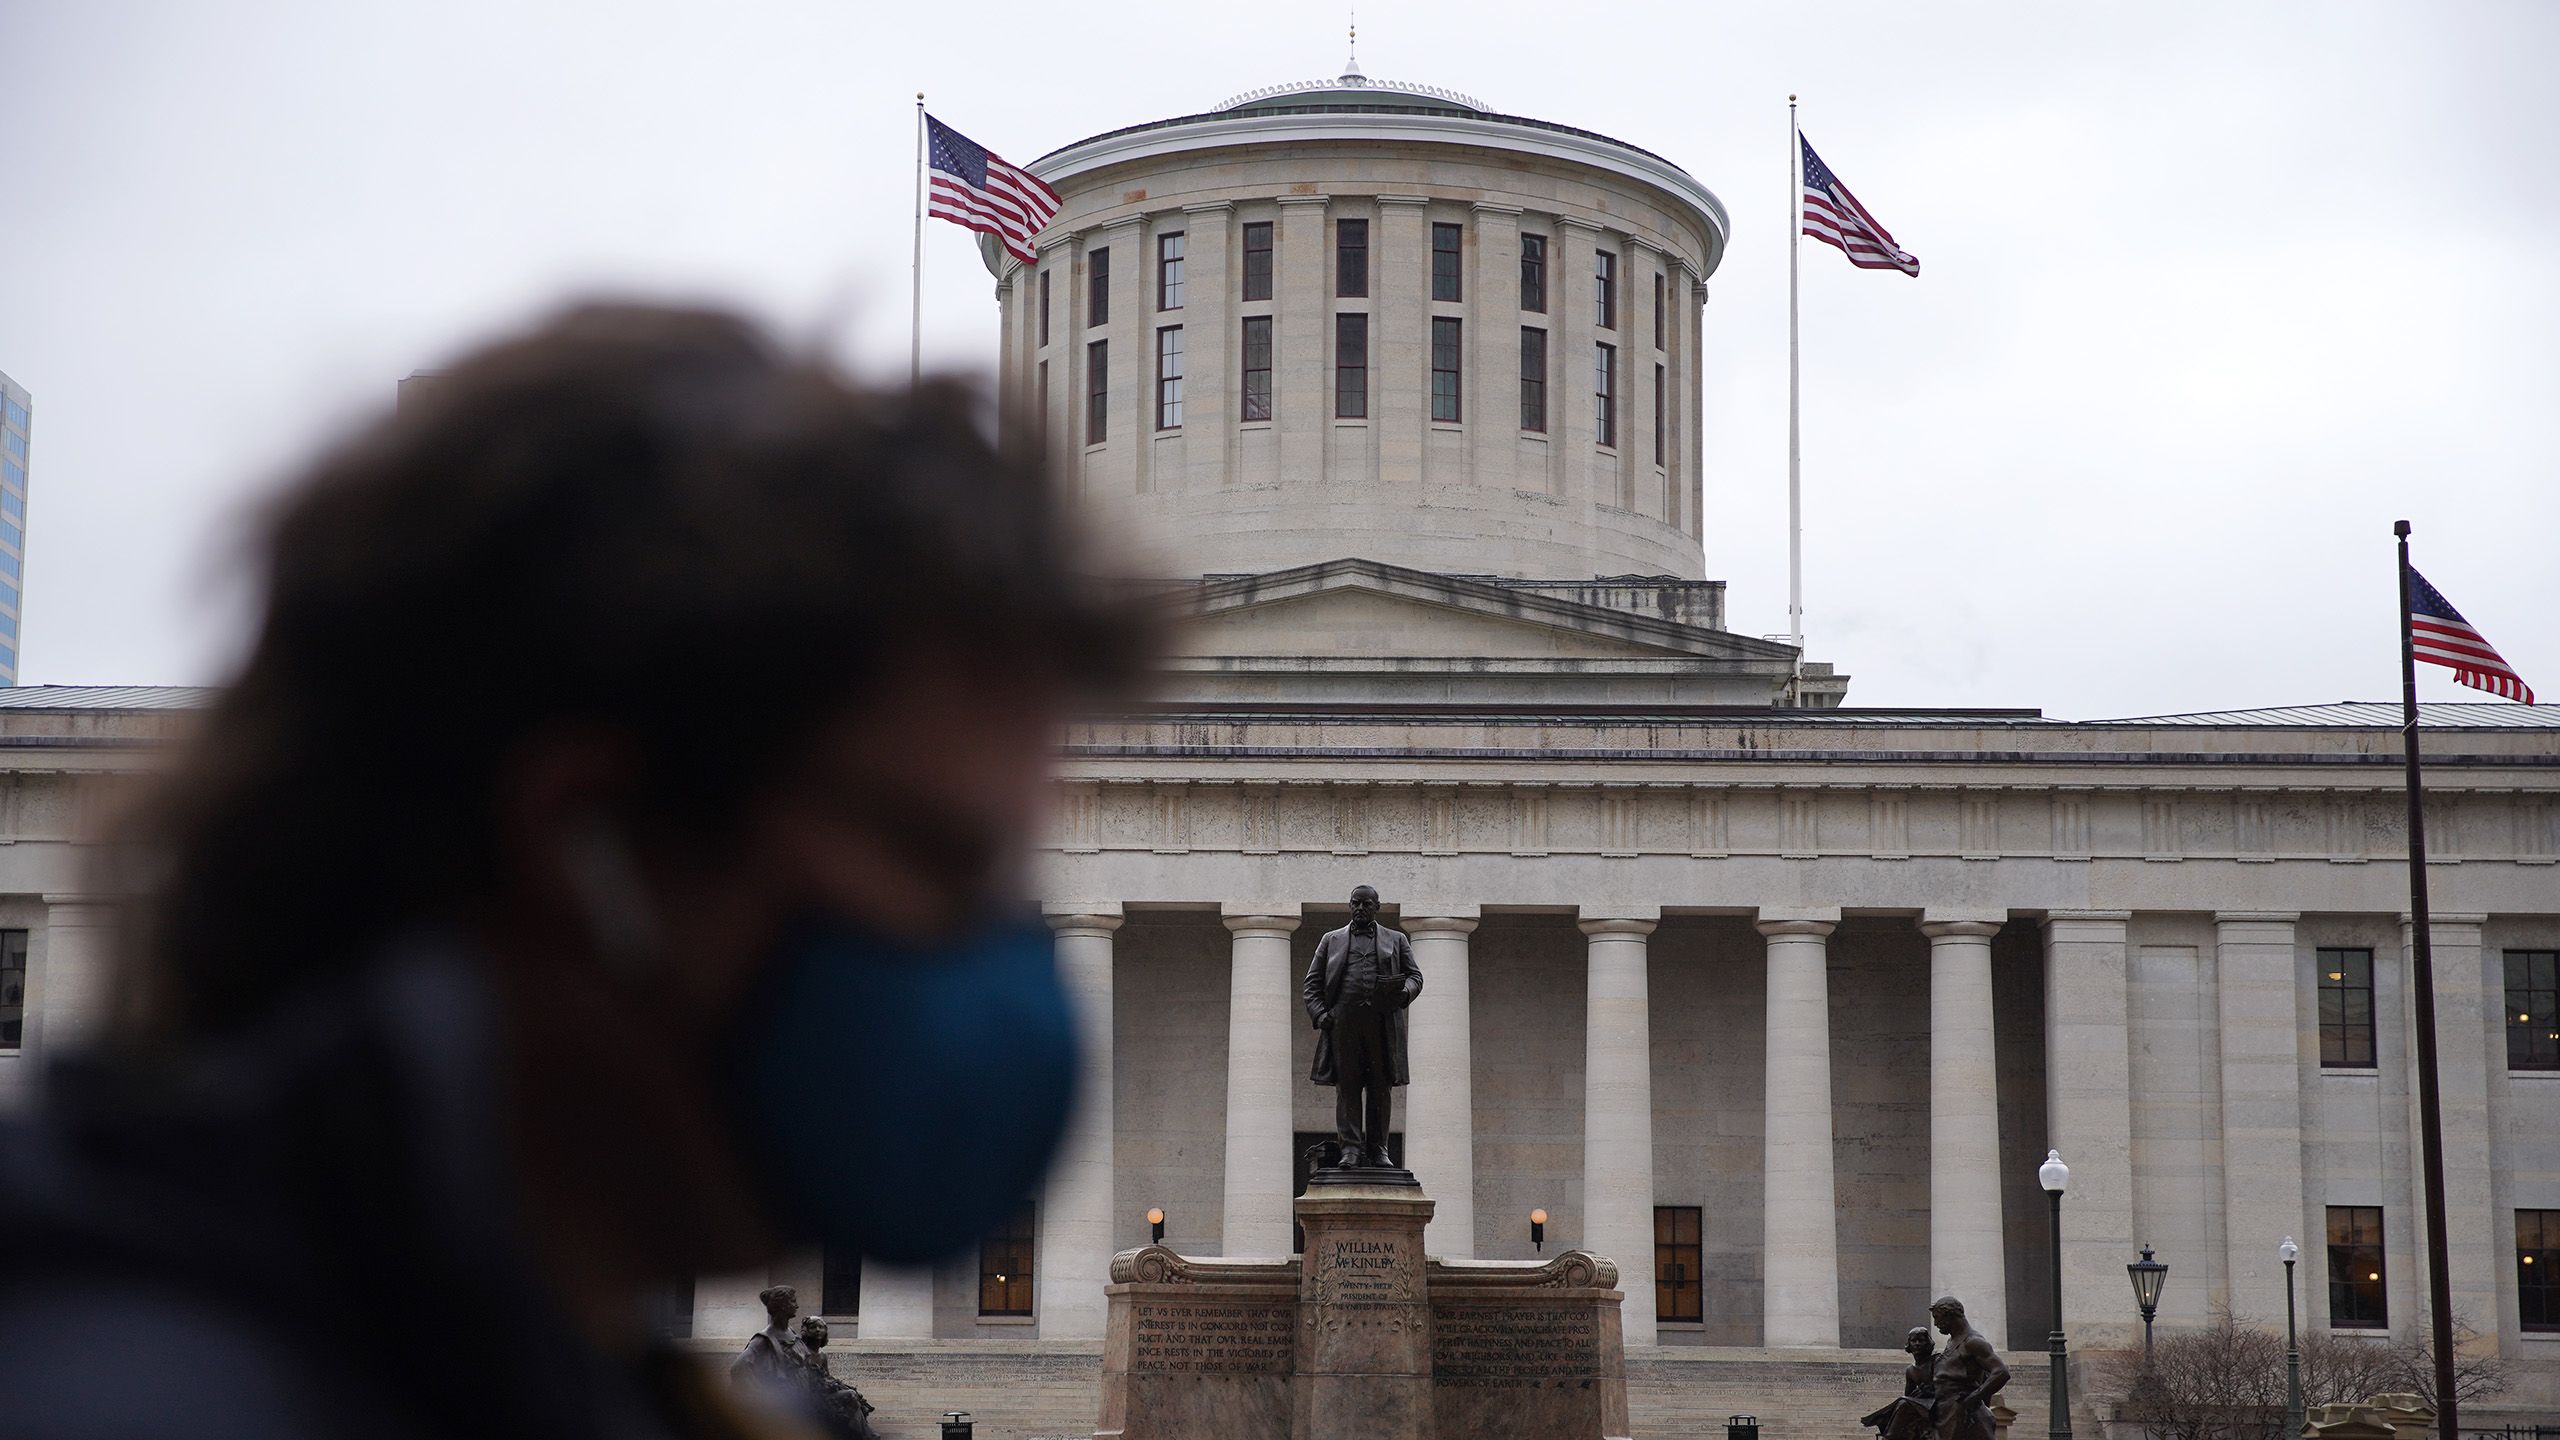 A person wearing a mask in the foreground walks past the Ohio Statehouse in Columbus.